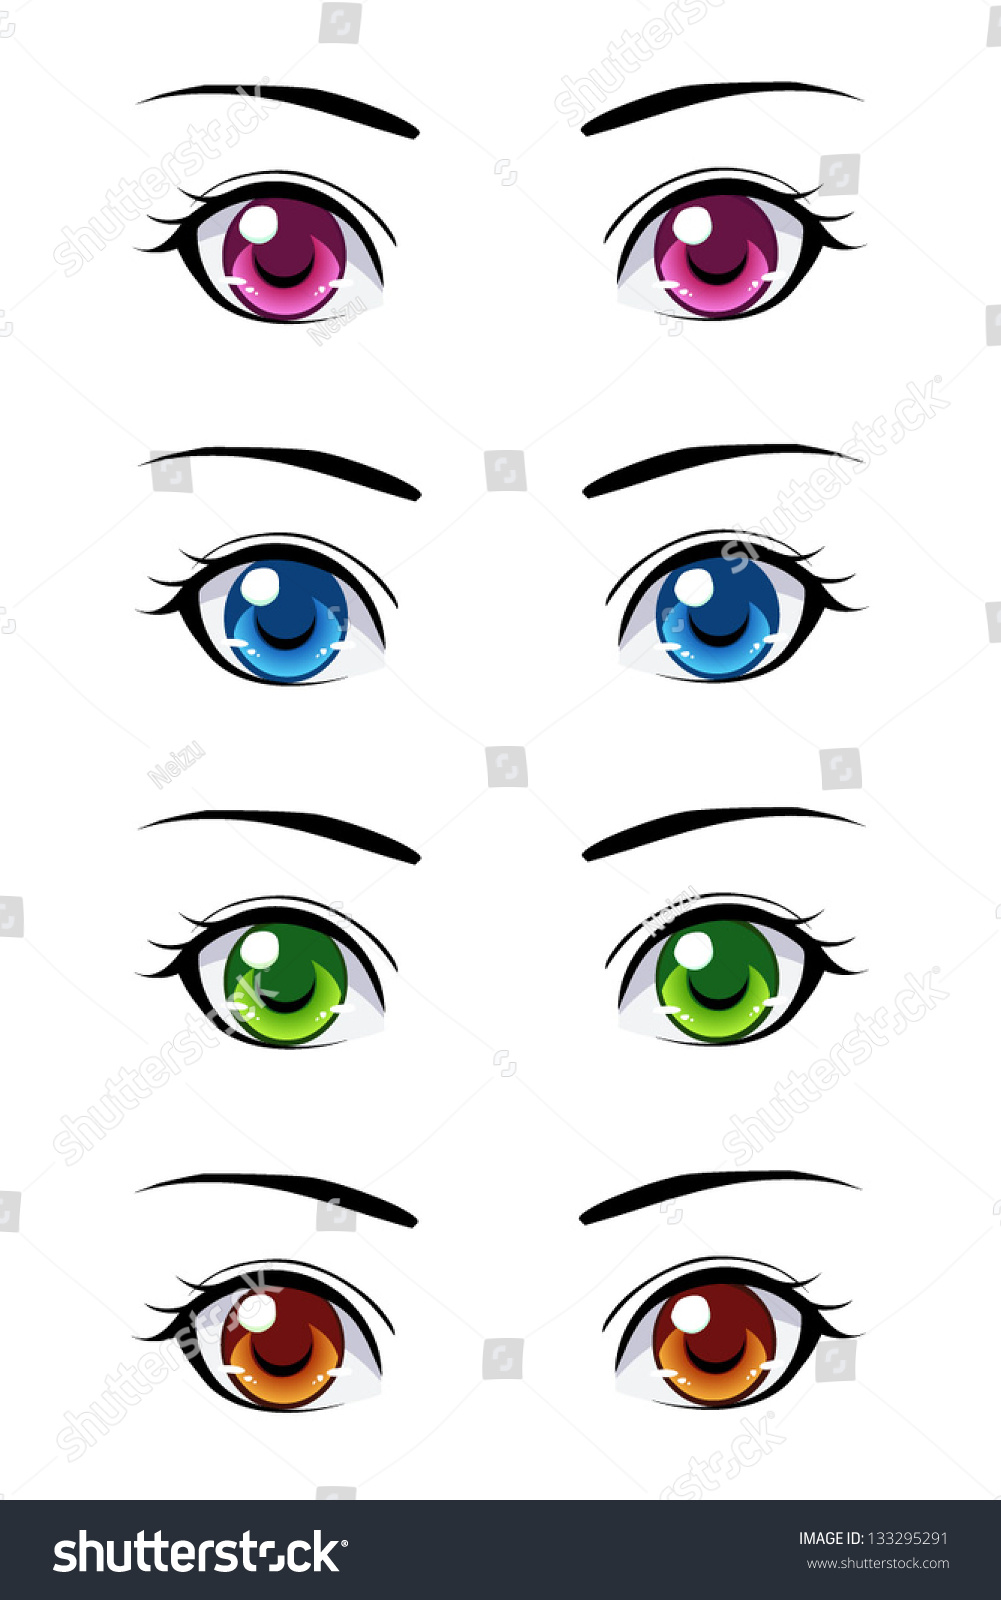 Set Of Anime Style Eyes Of Different Colors, Isolated On White. Stock ...